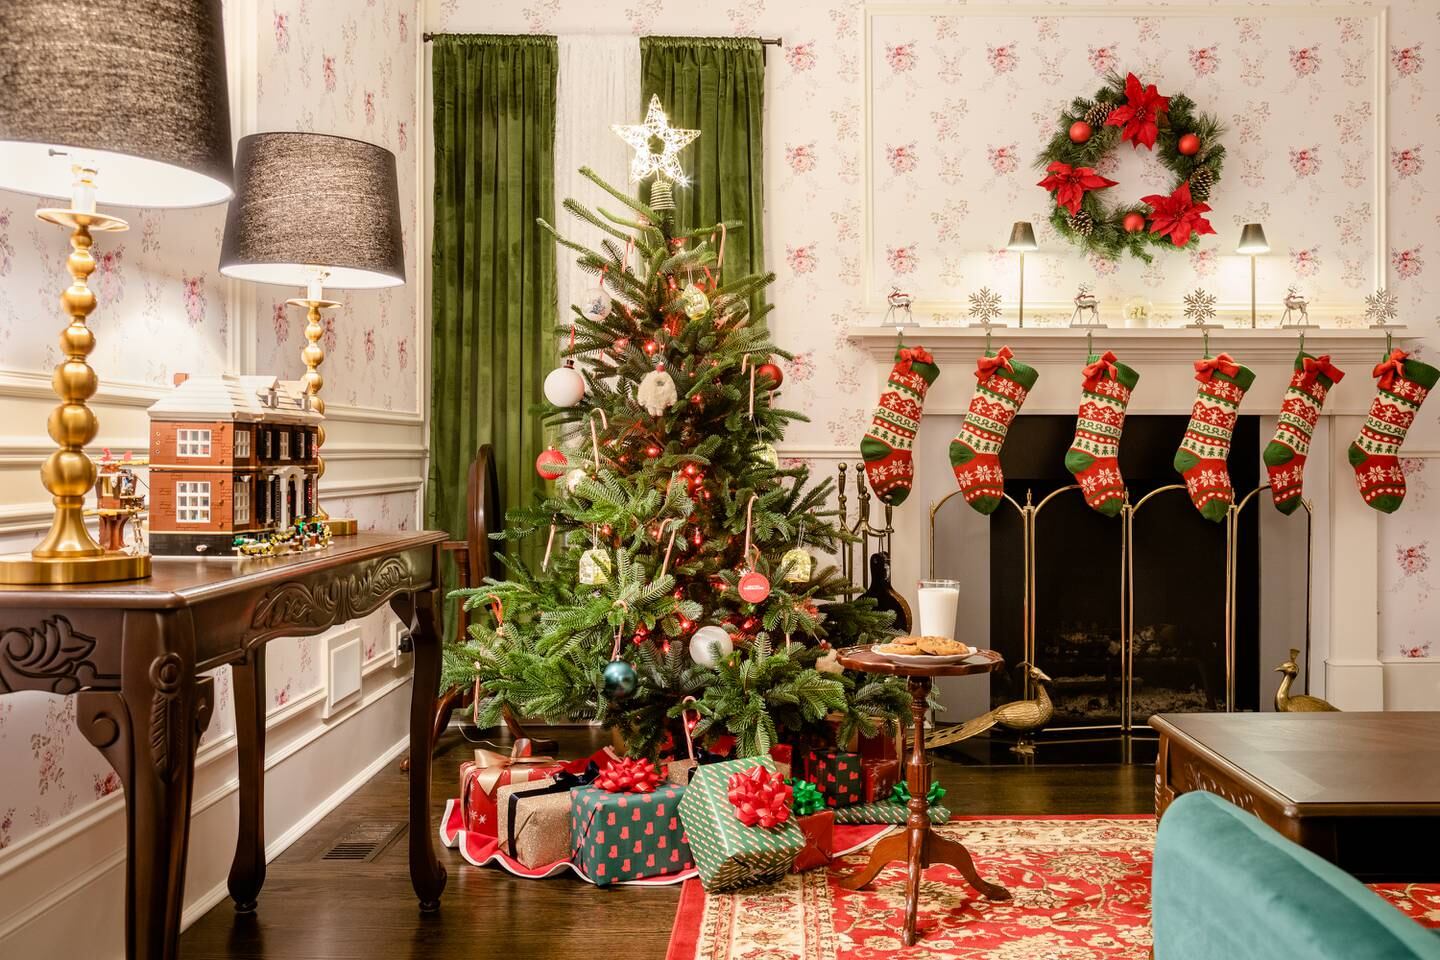 Expect a cosy festive atmosphere and perfectly trimmed tree. Airbnb